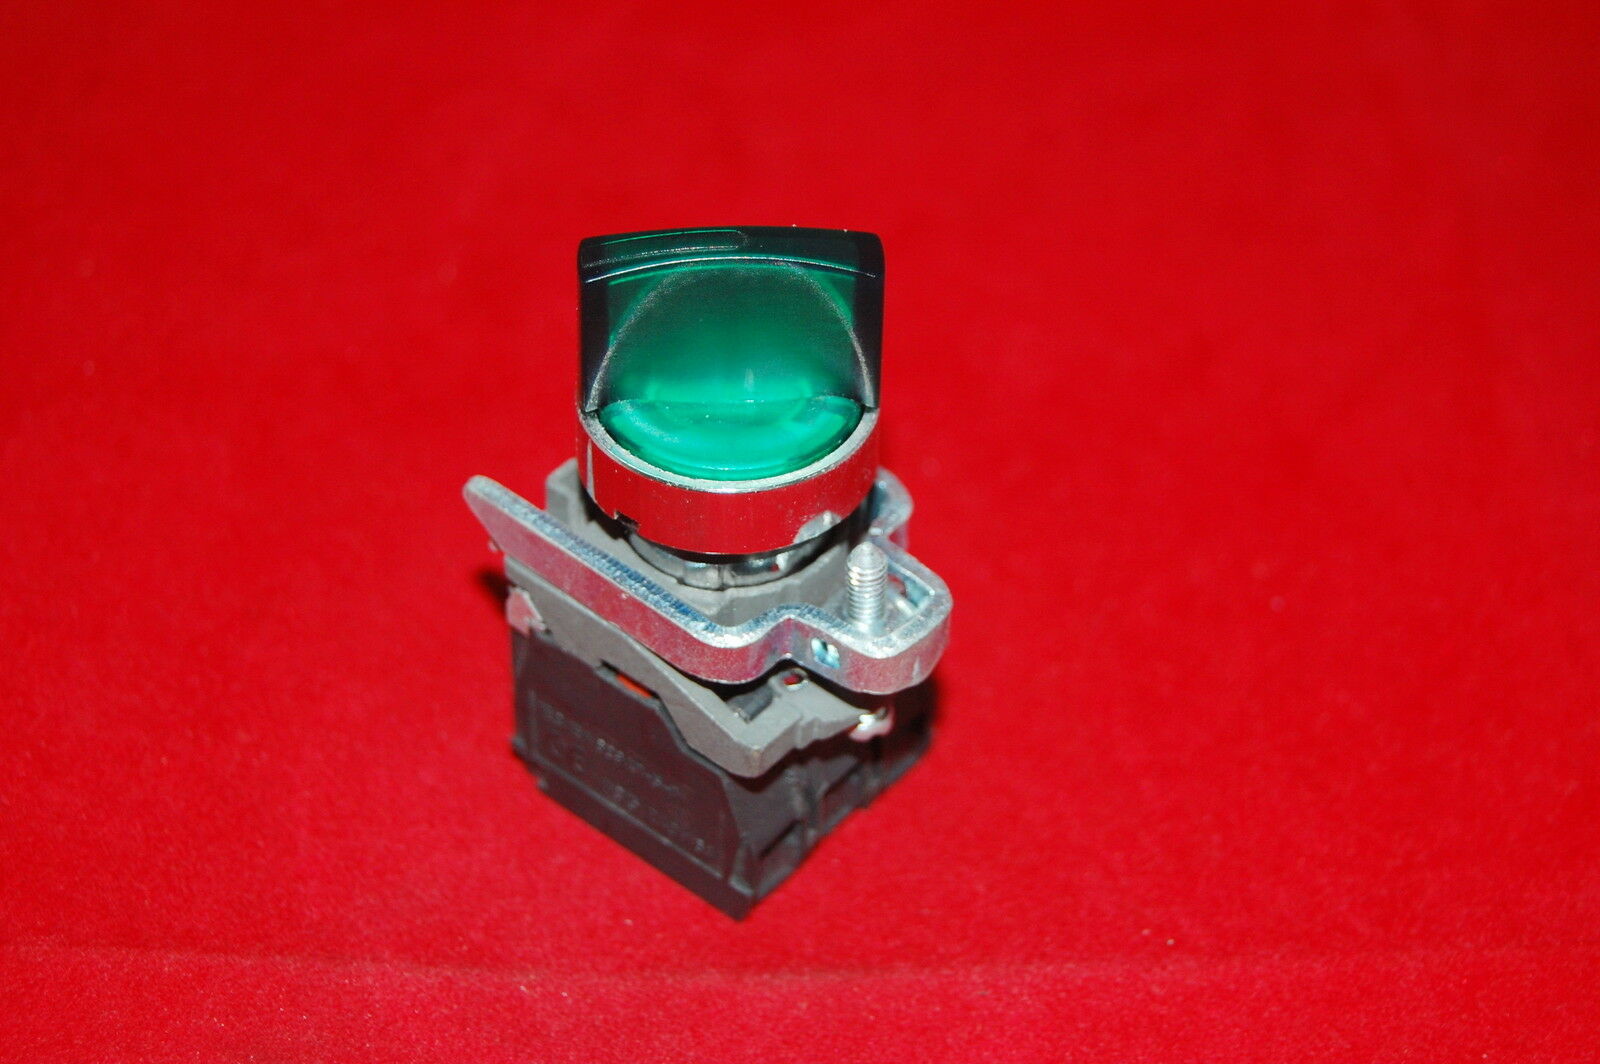 22mm ILLUMINATED Select switch 2 Position Fits Green XB4 BK123B5 Maintained 24V